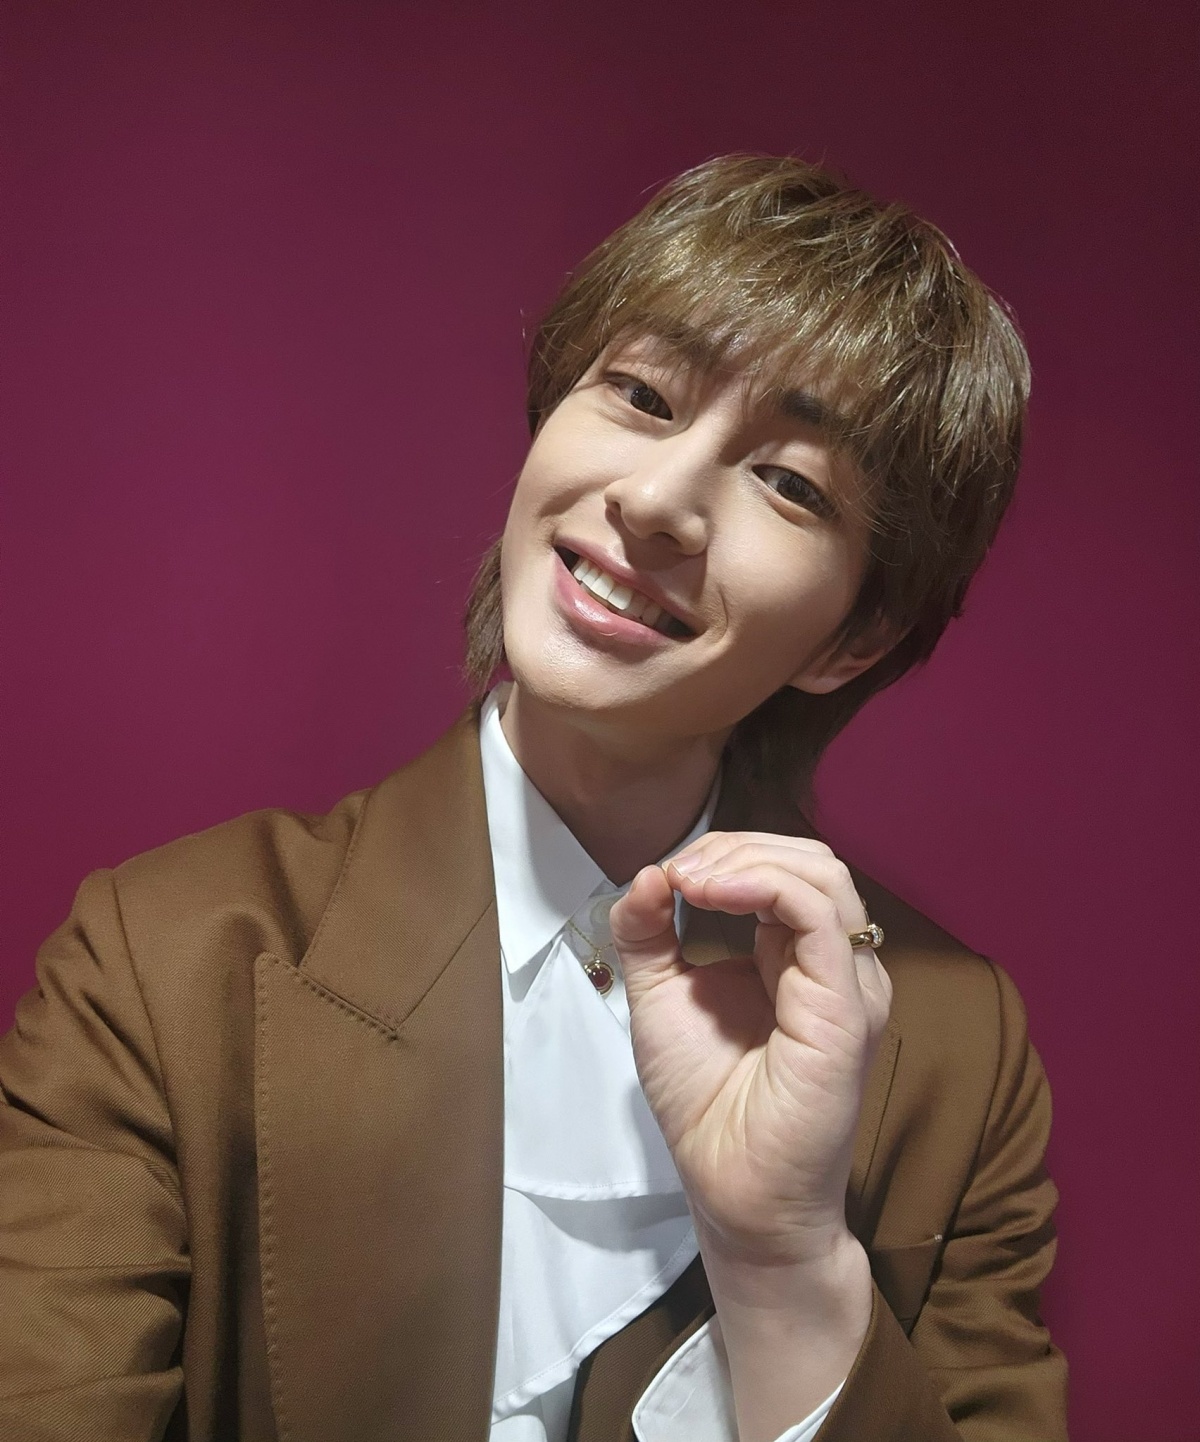 Onew, first solo album topping the album chart